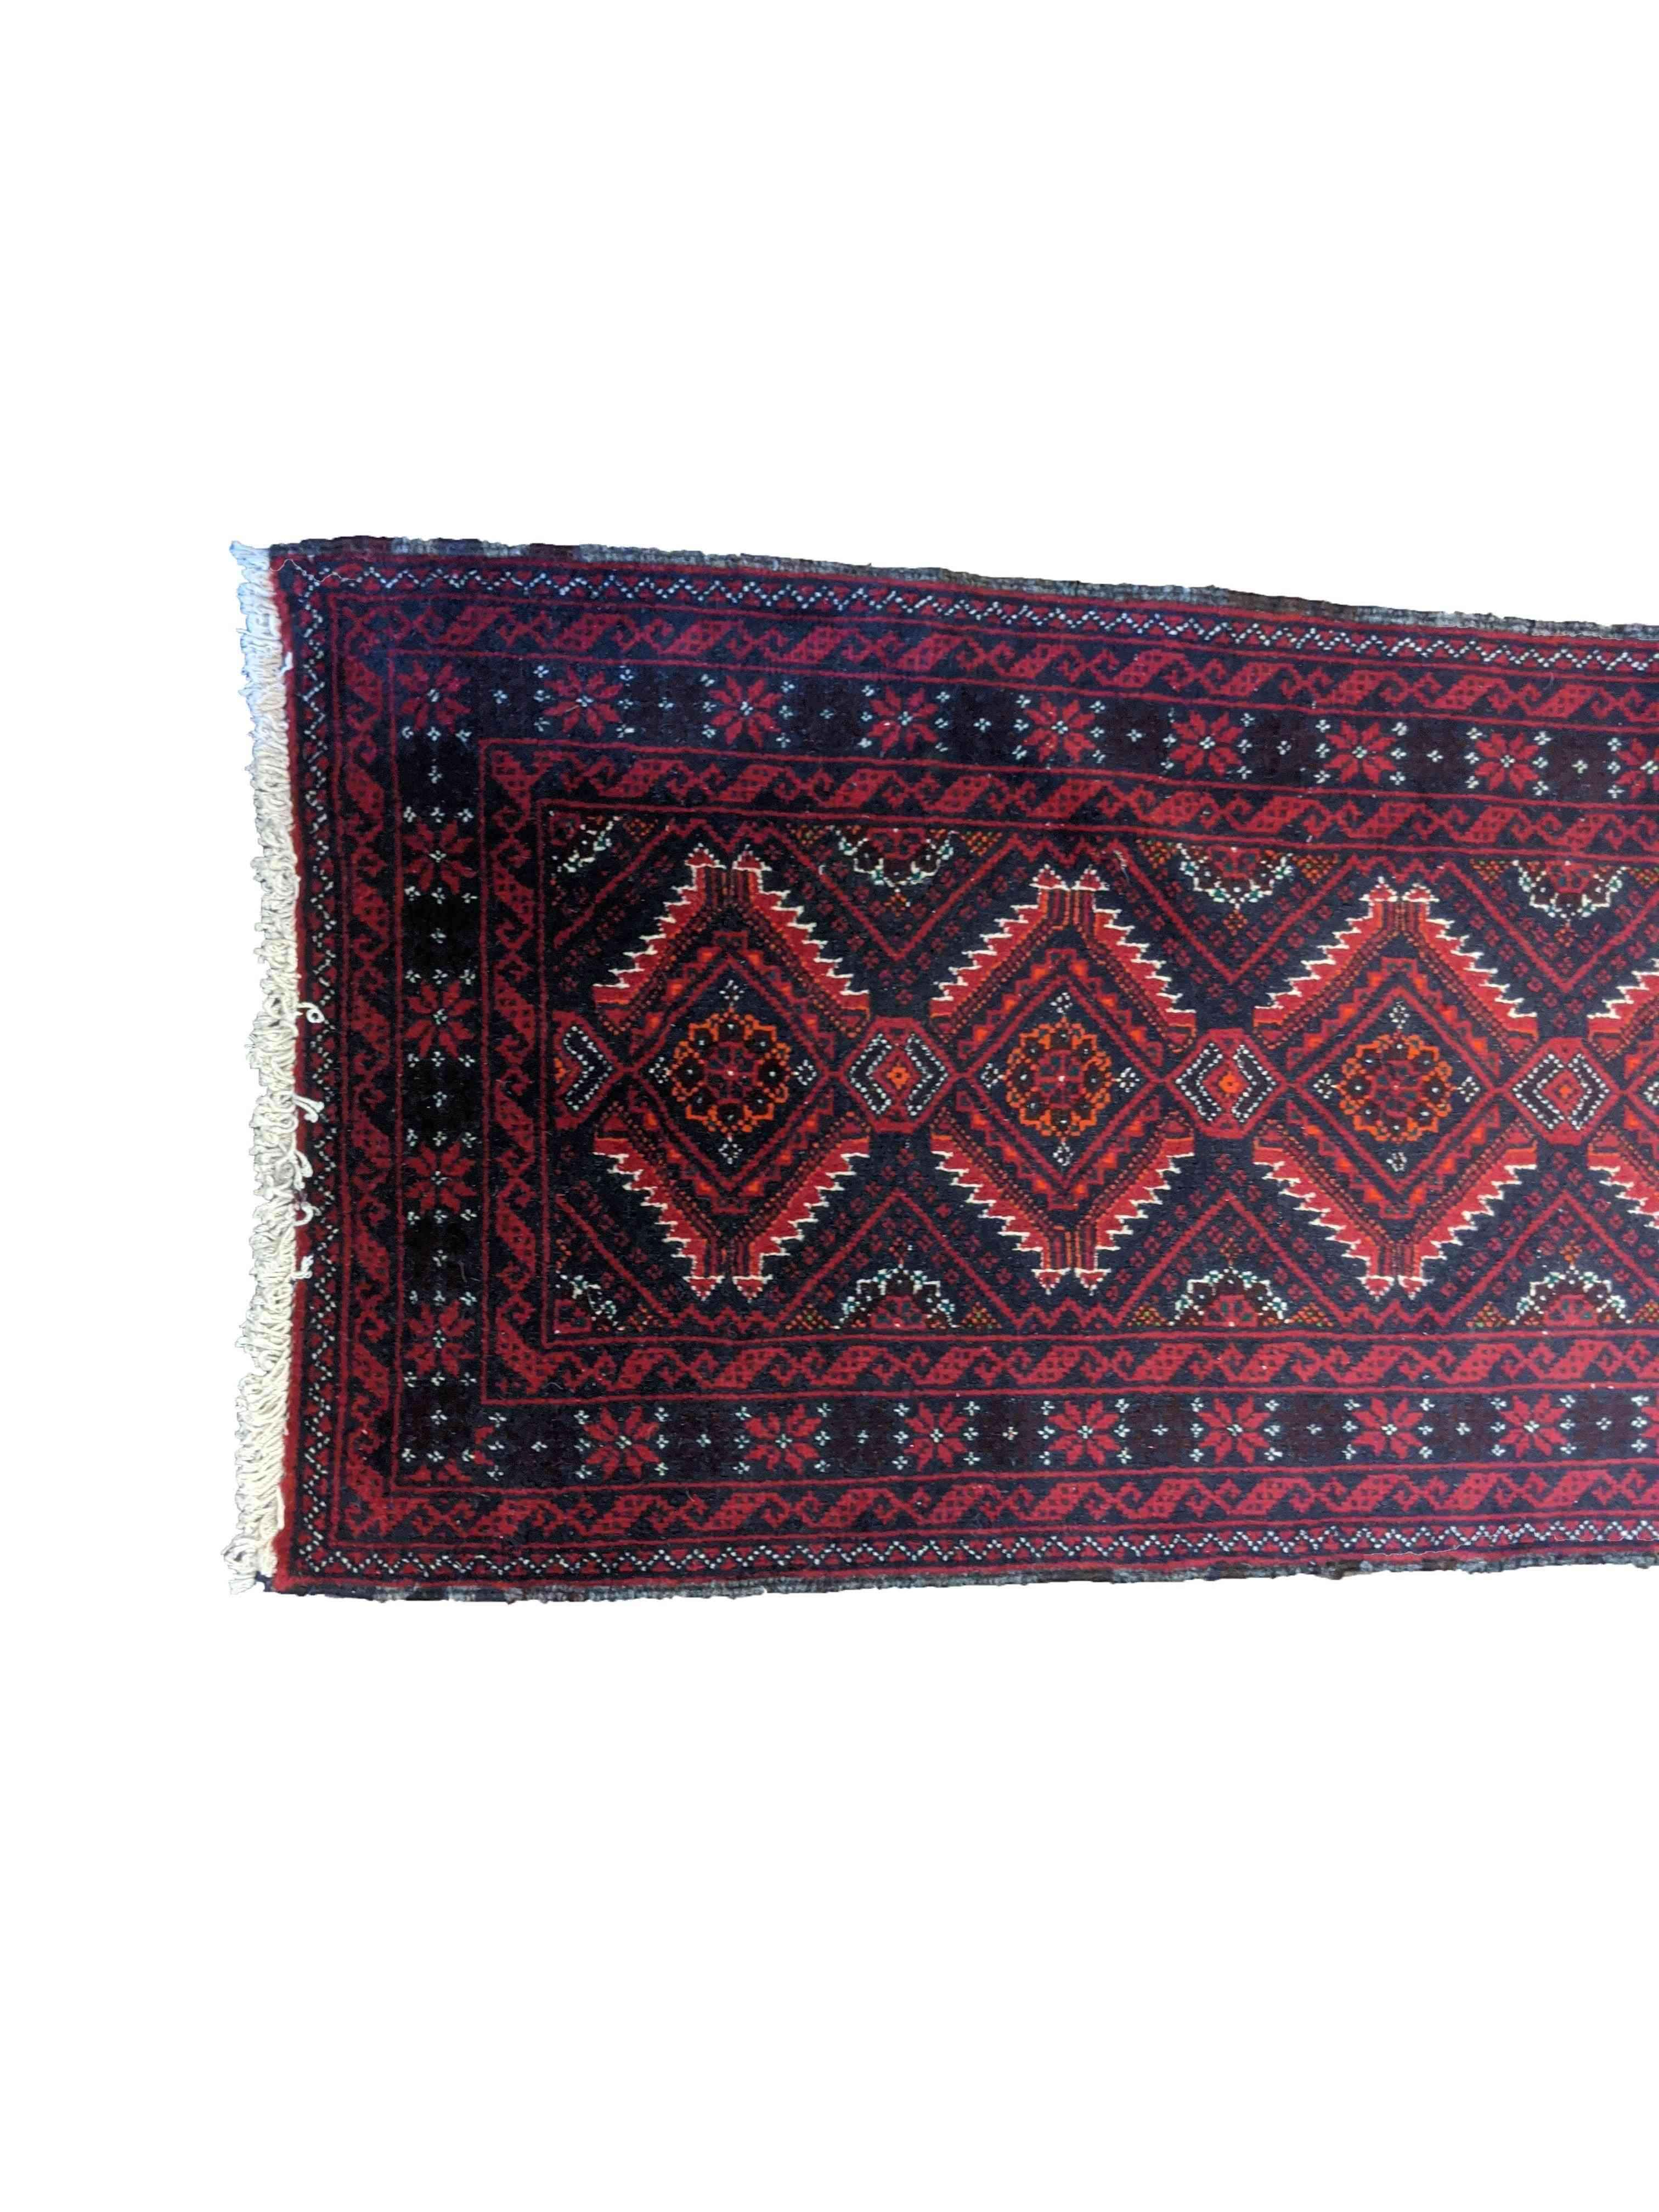 285 x 64 cm Persian Baluch Tribal Red Rug - Rugmaster